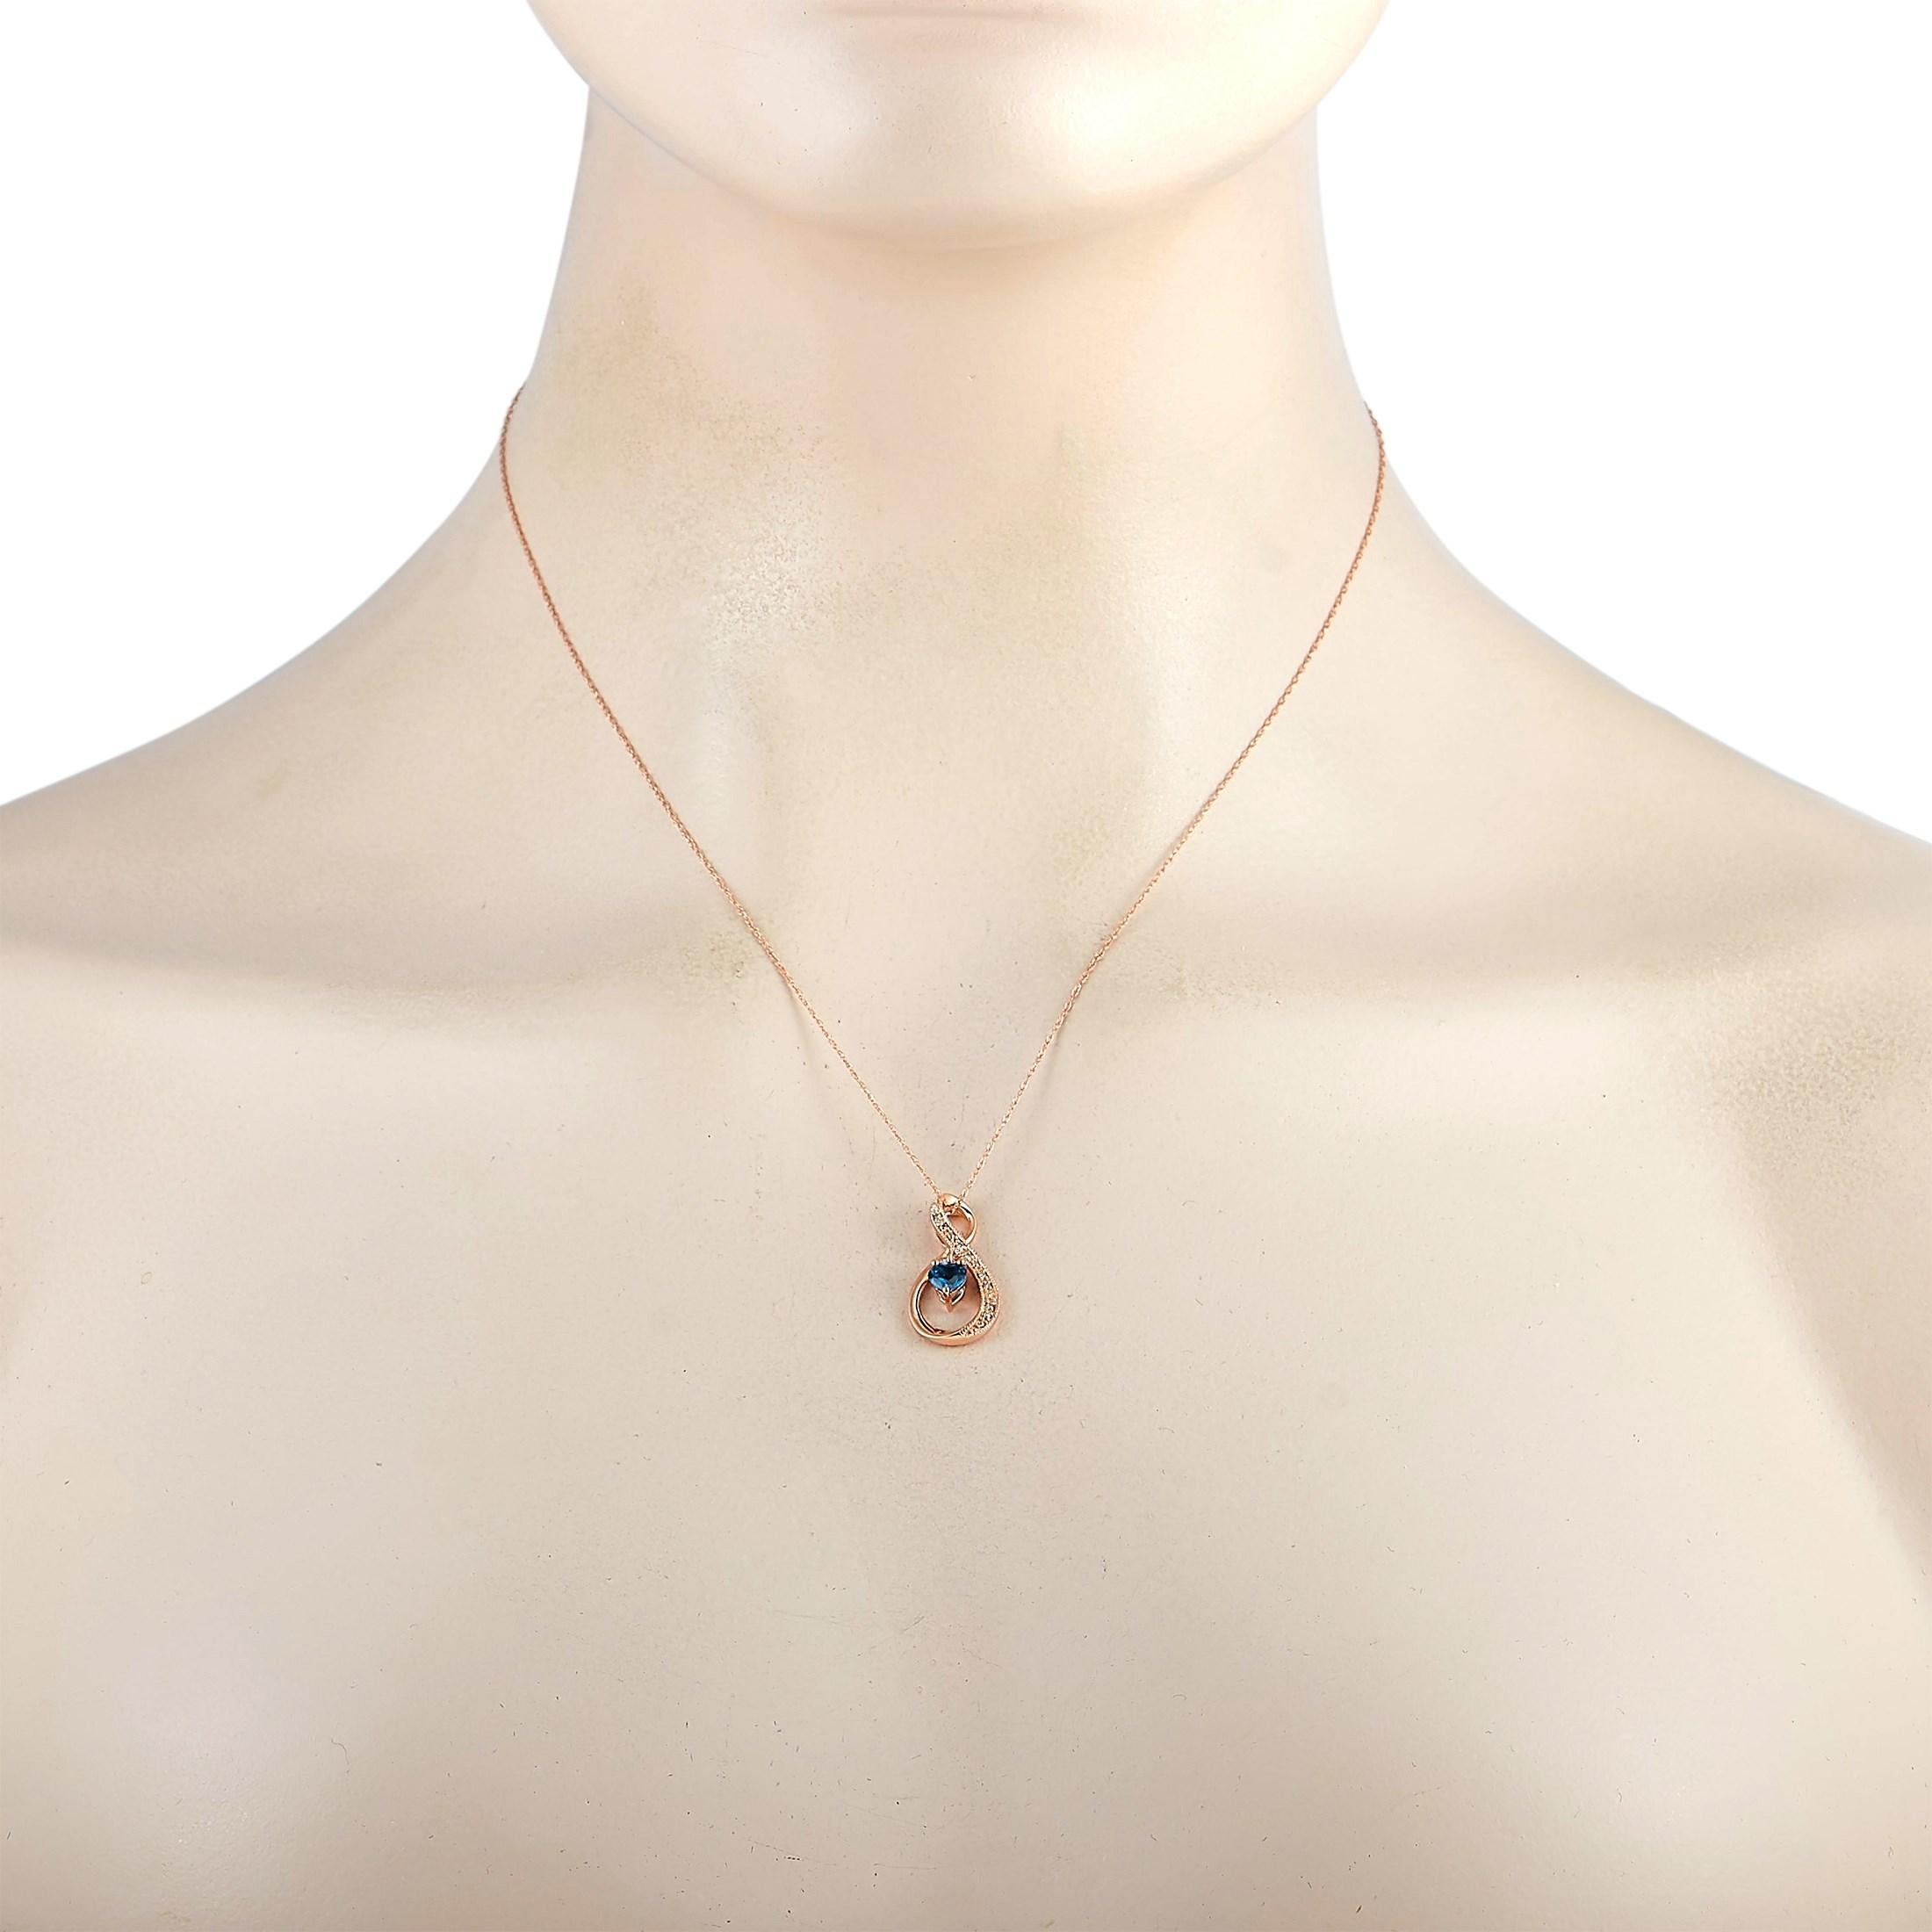 This LB Exclusive necklace is made of 14K rose gold and embellished with blue topaz and a total of 0.03 carats of diamonds. The necklace weighs 2.6 grams and is presented with a 17.50” chain and a pendant that measures 0.87” in length and 0.45” in